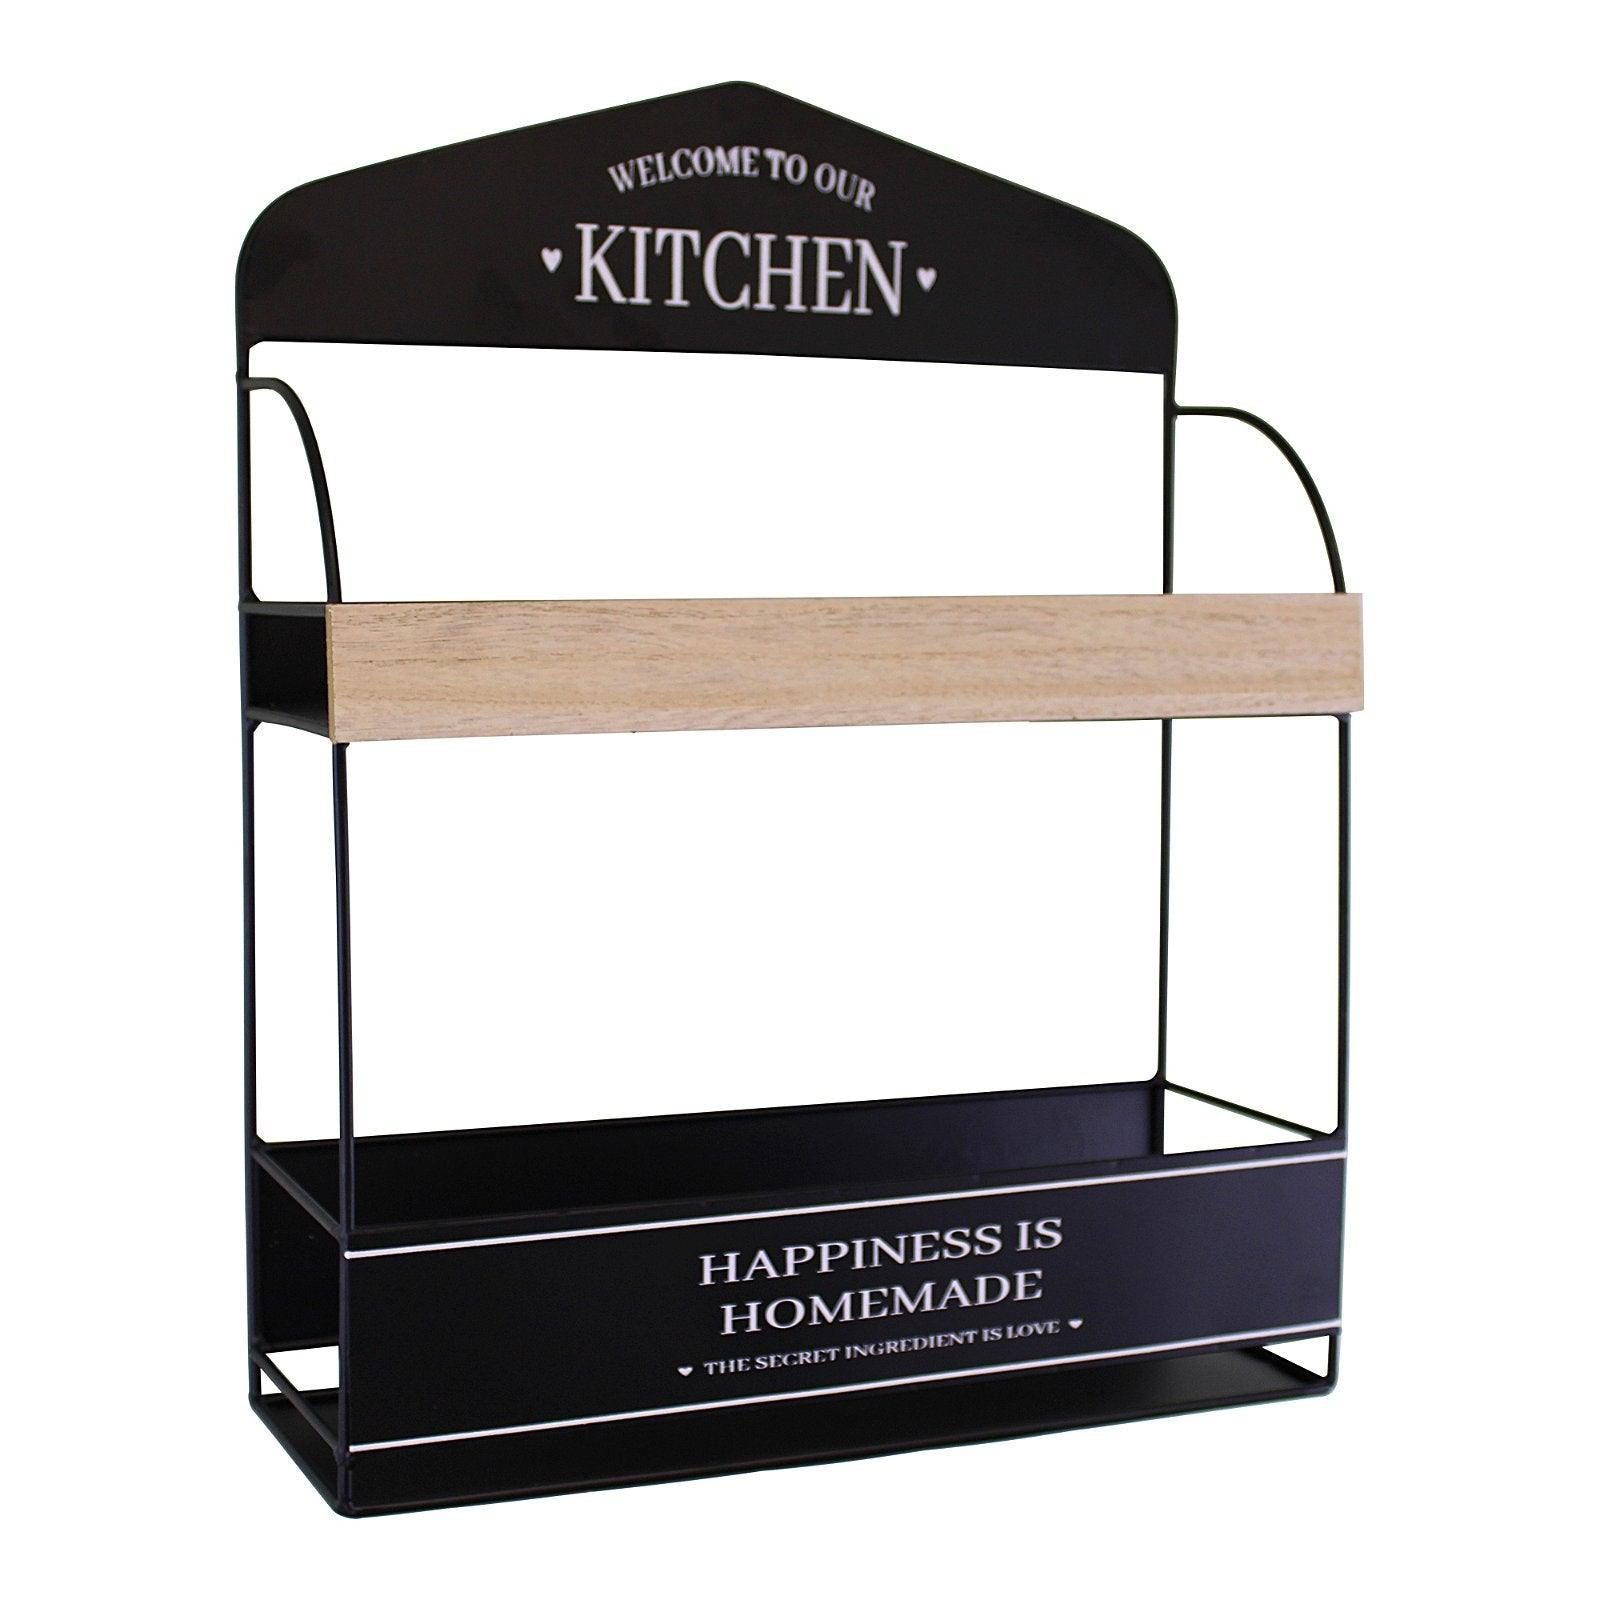 View Decorative Wall Hanging Kitchen Shelving Unit information